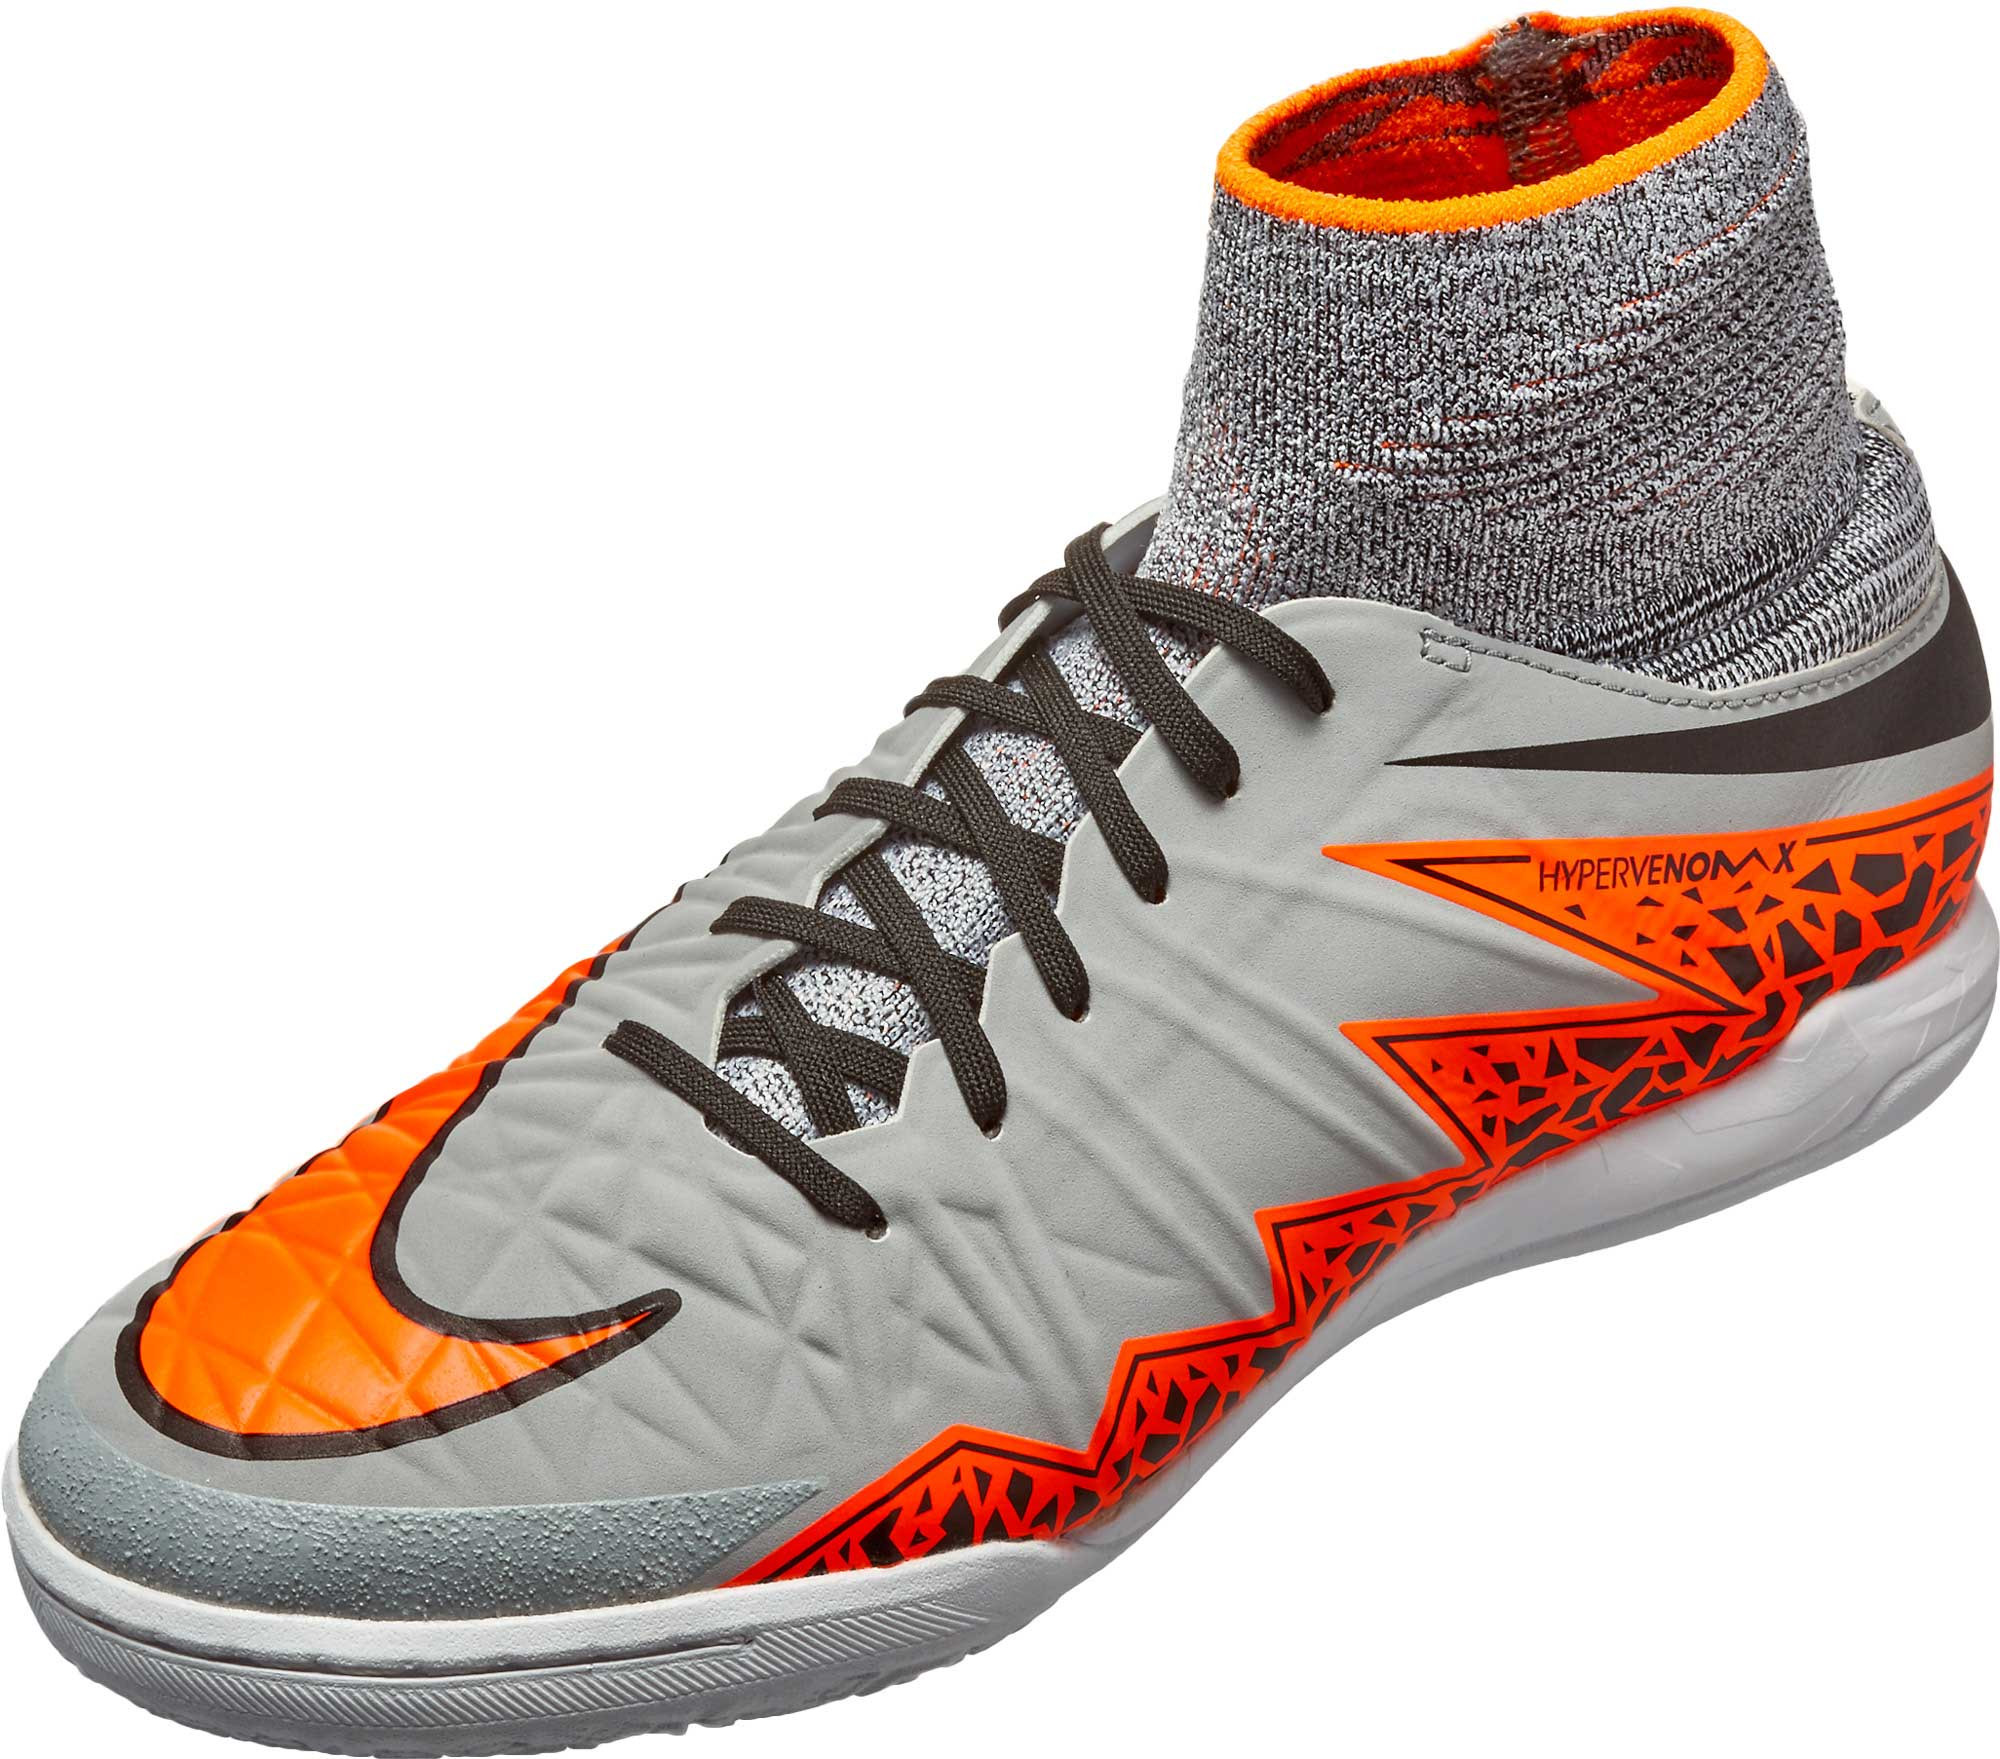 Nike Indoor Shoes For Kids
 Nike Kids HypervenomX Proximo Indoor Shoes Grey and